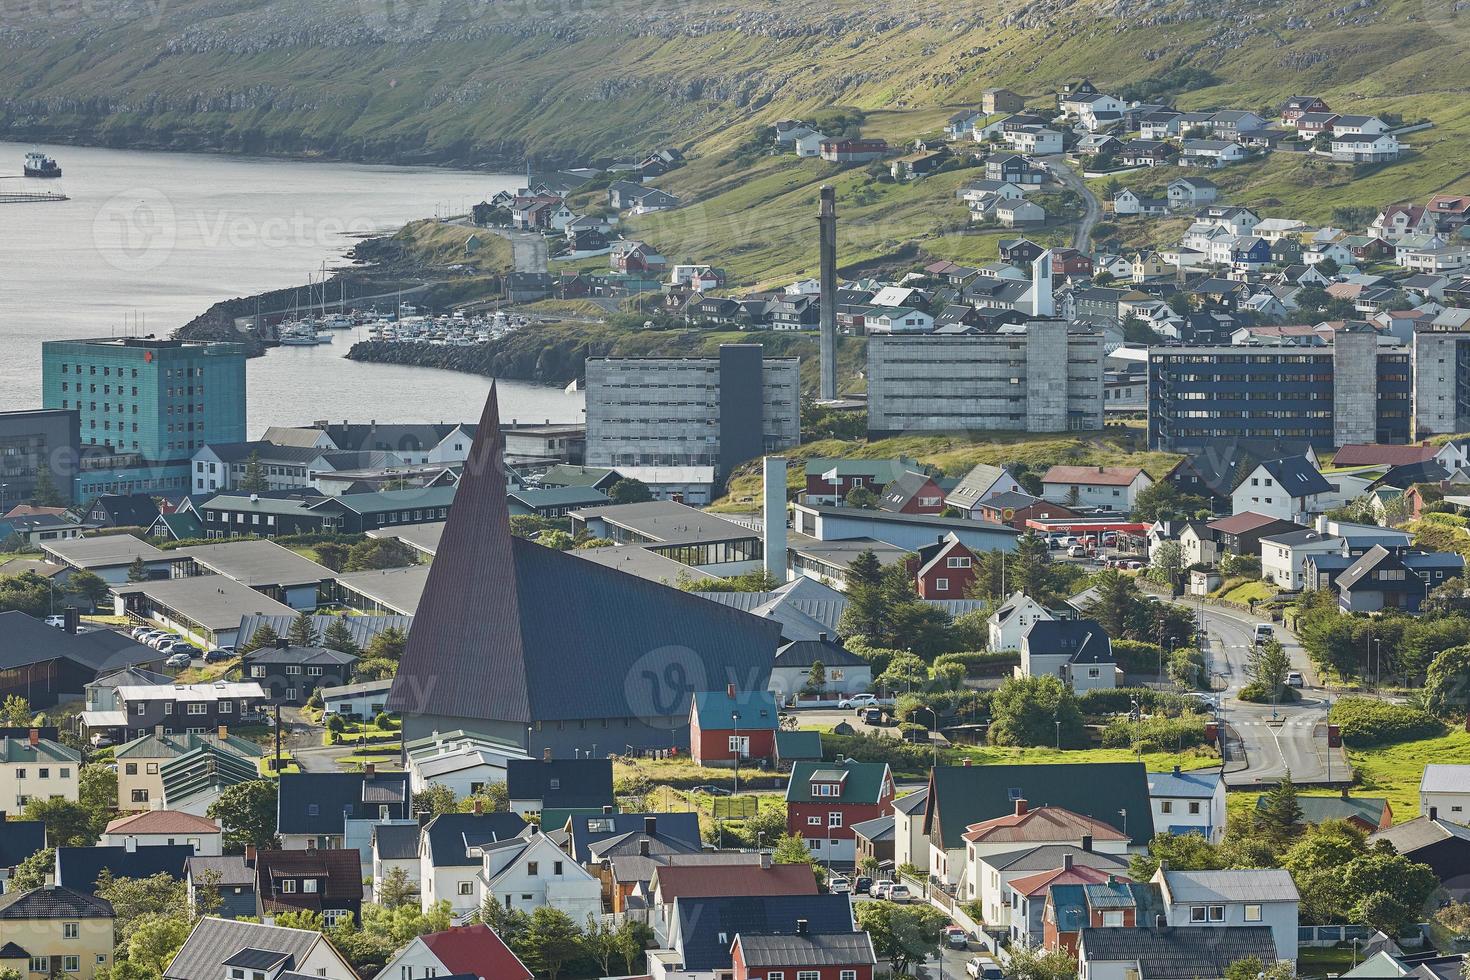 Torshawn Capital of Faroe Islands with its downtown area and port in bay photo